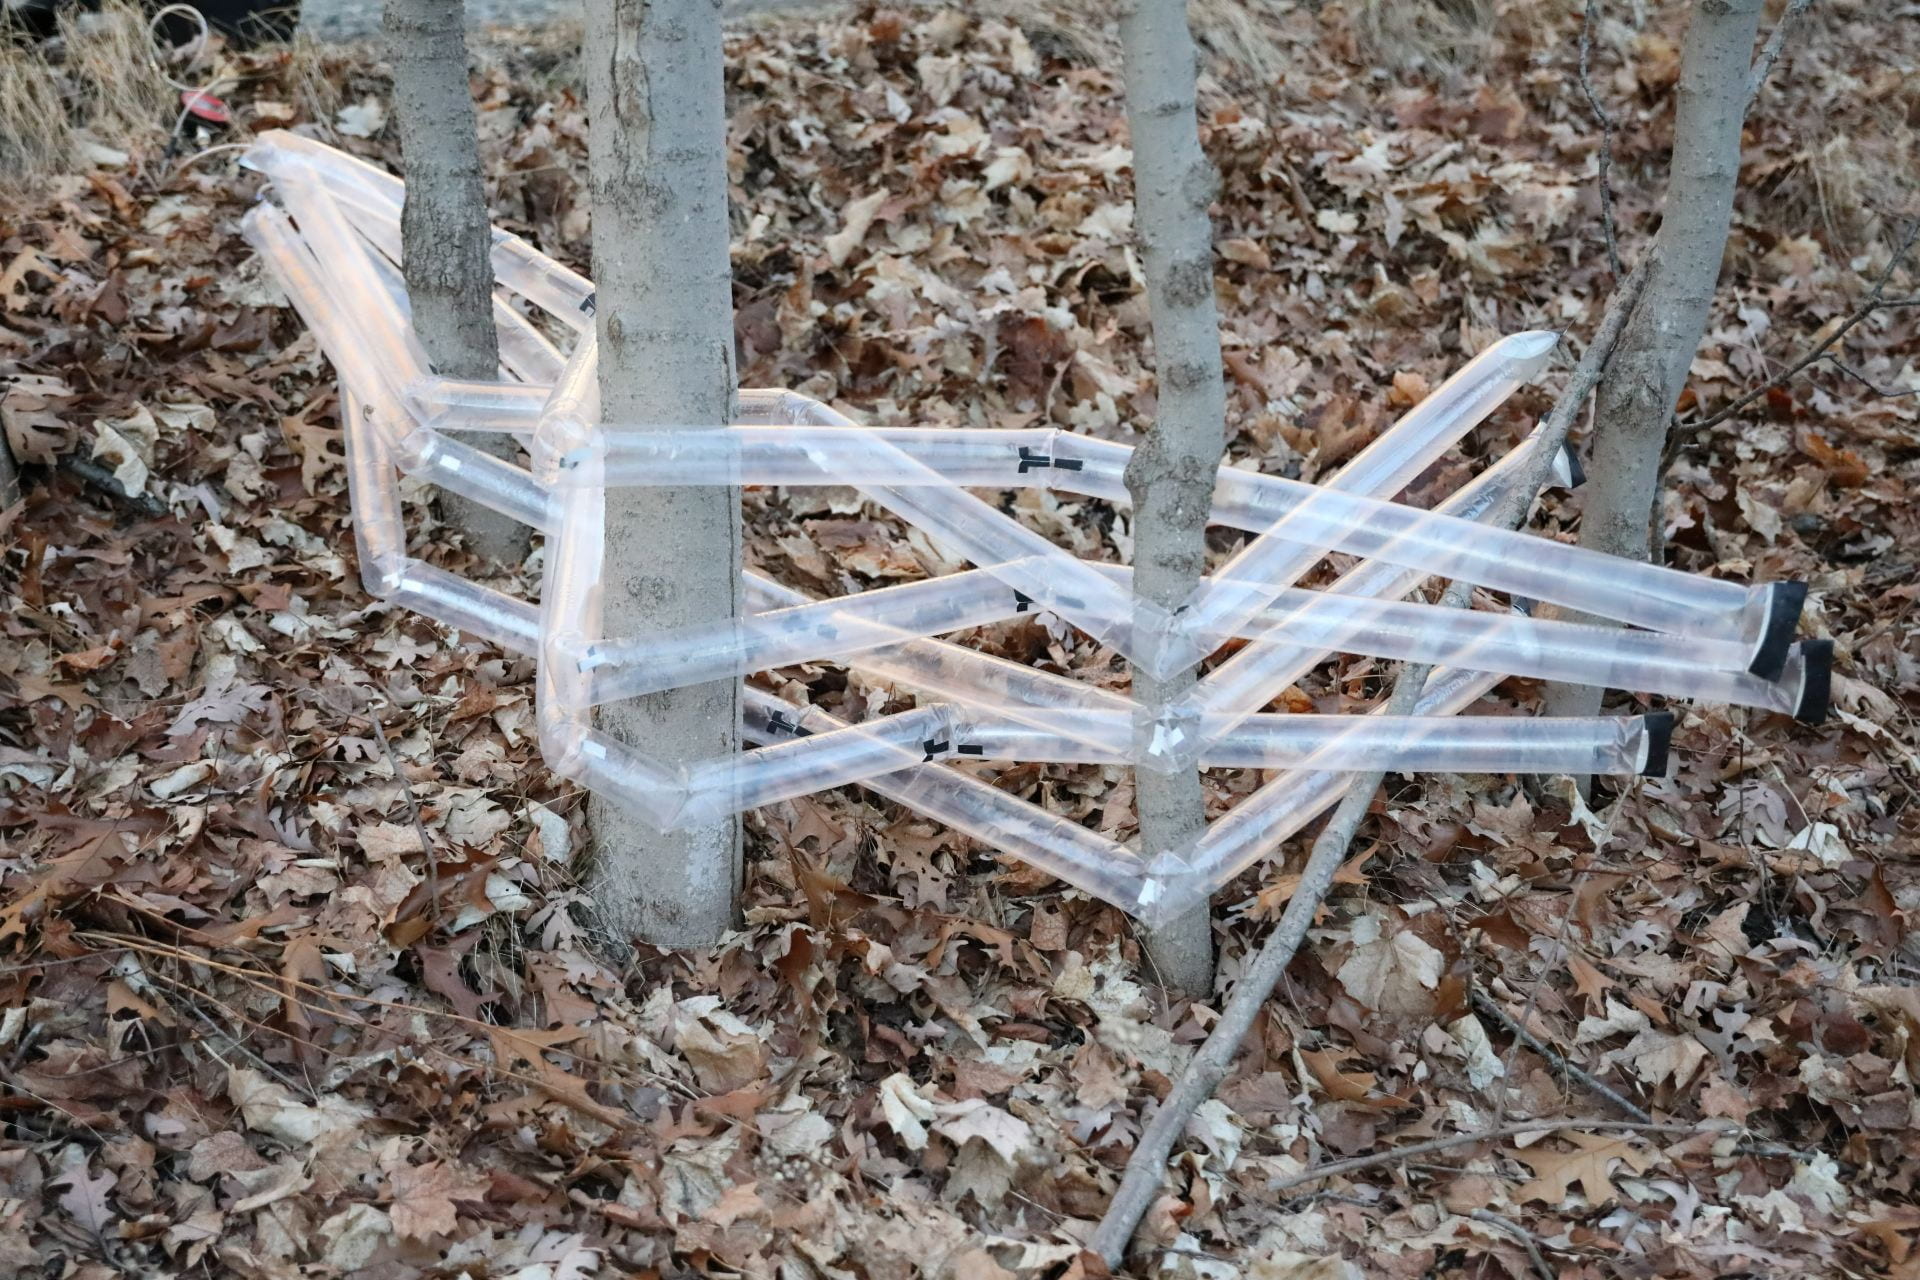 Example of how inflated tubes can be weaved around existing environmental features